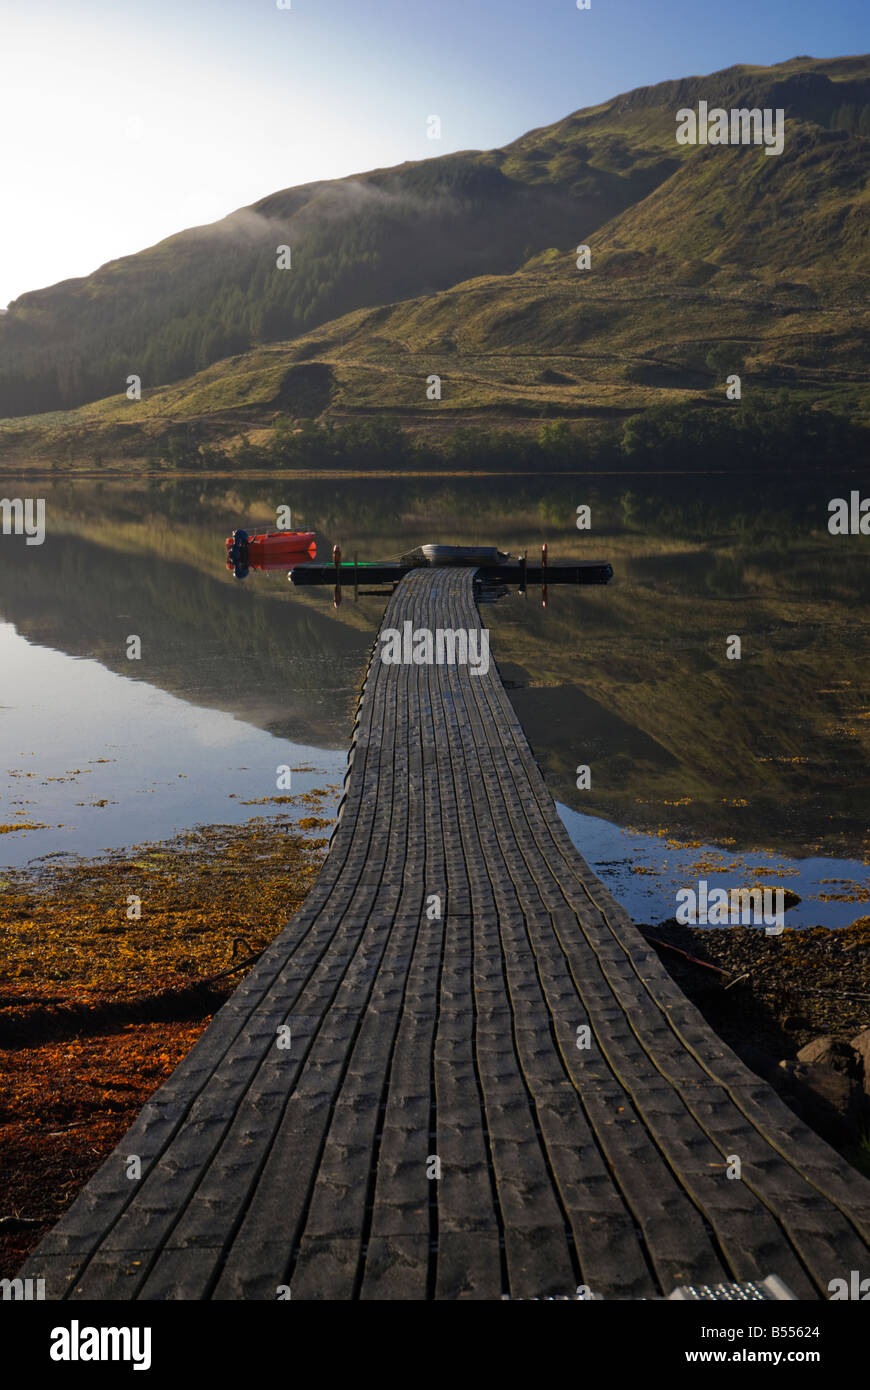 Looking down the jetty and the reflections in Loch Teacuis, Morvern, Scotland Stock Photo